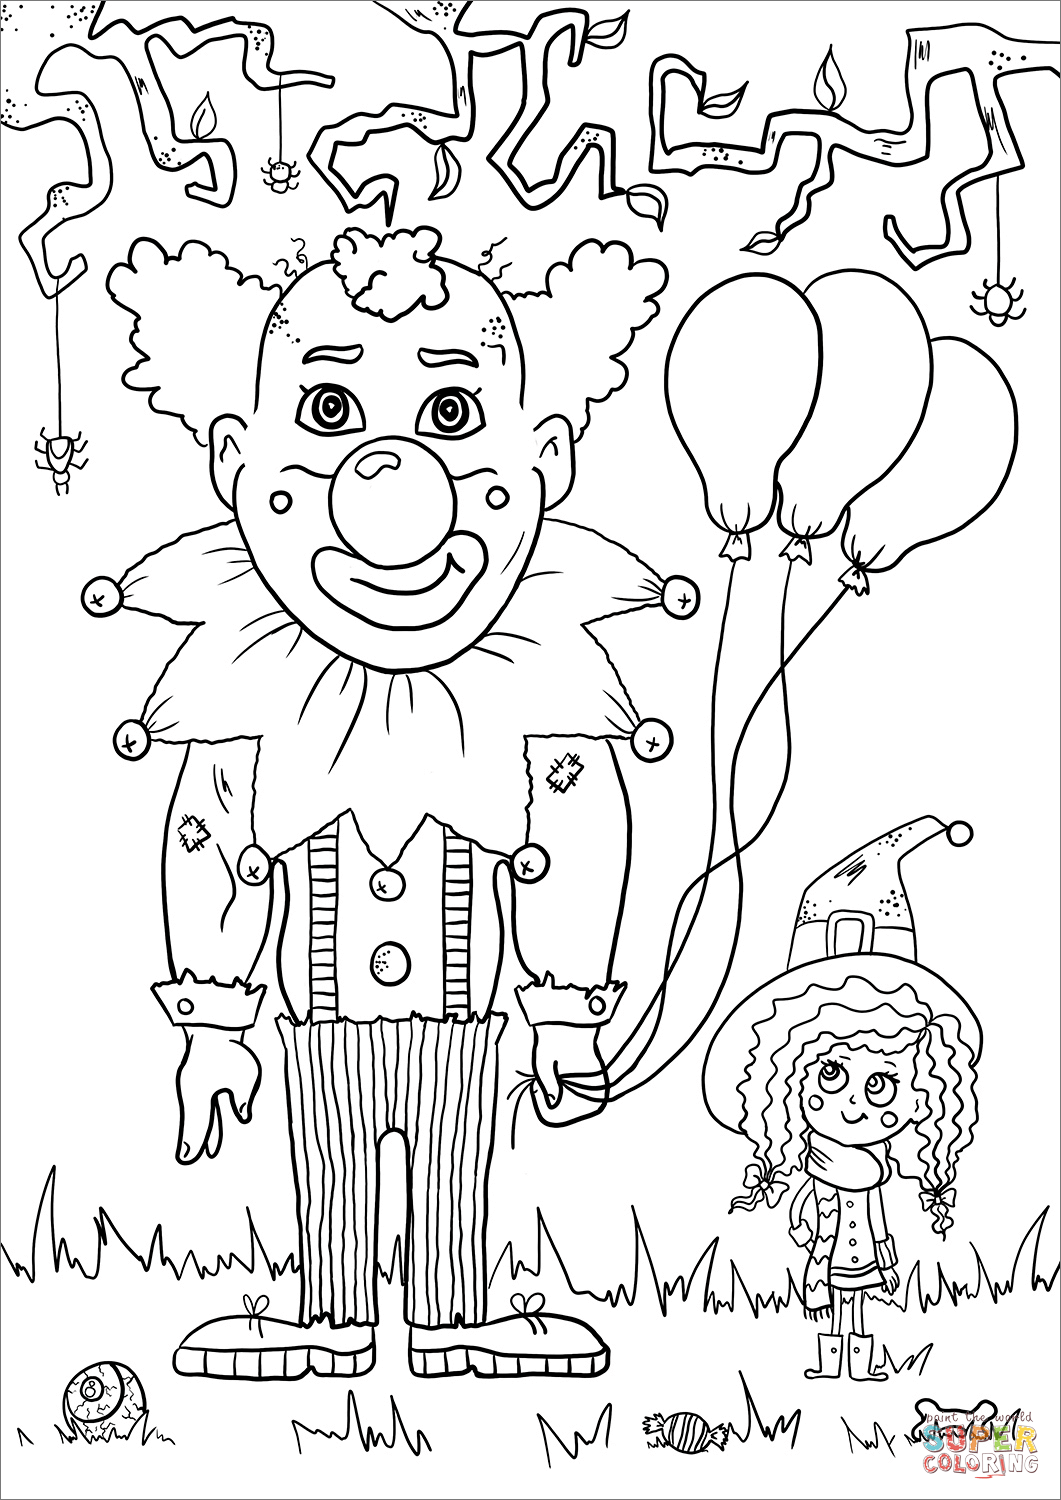 Evil clown coloring page free printable coloring pages